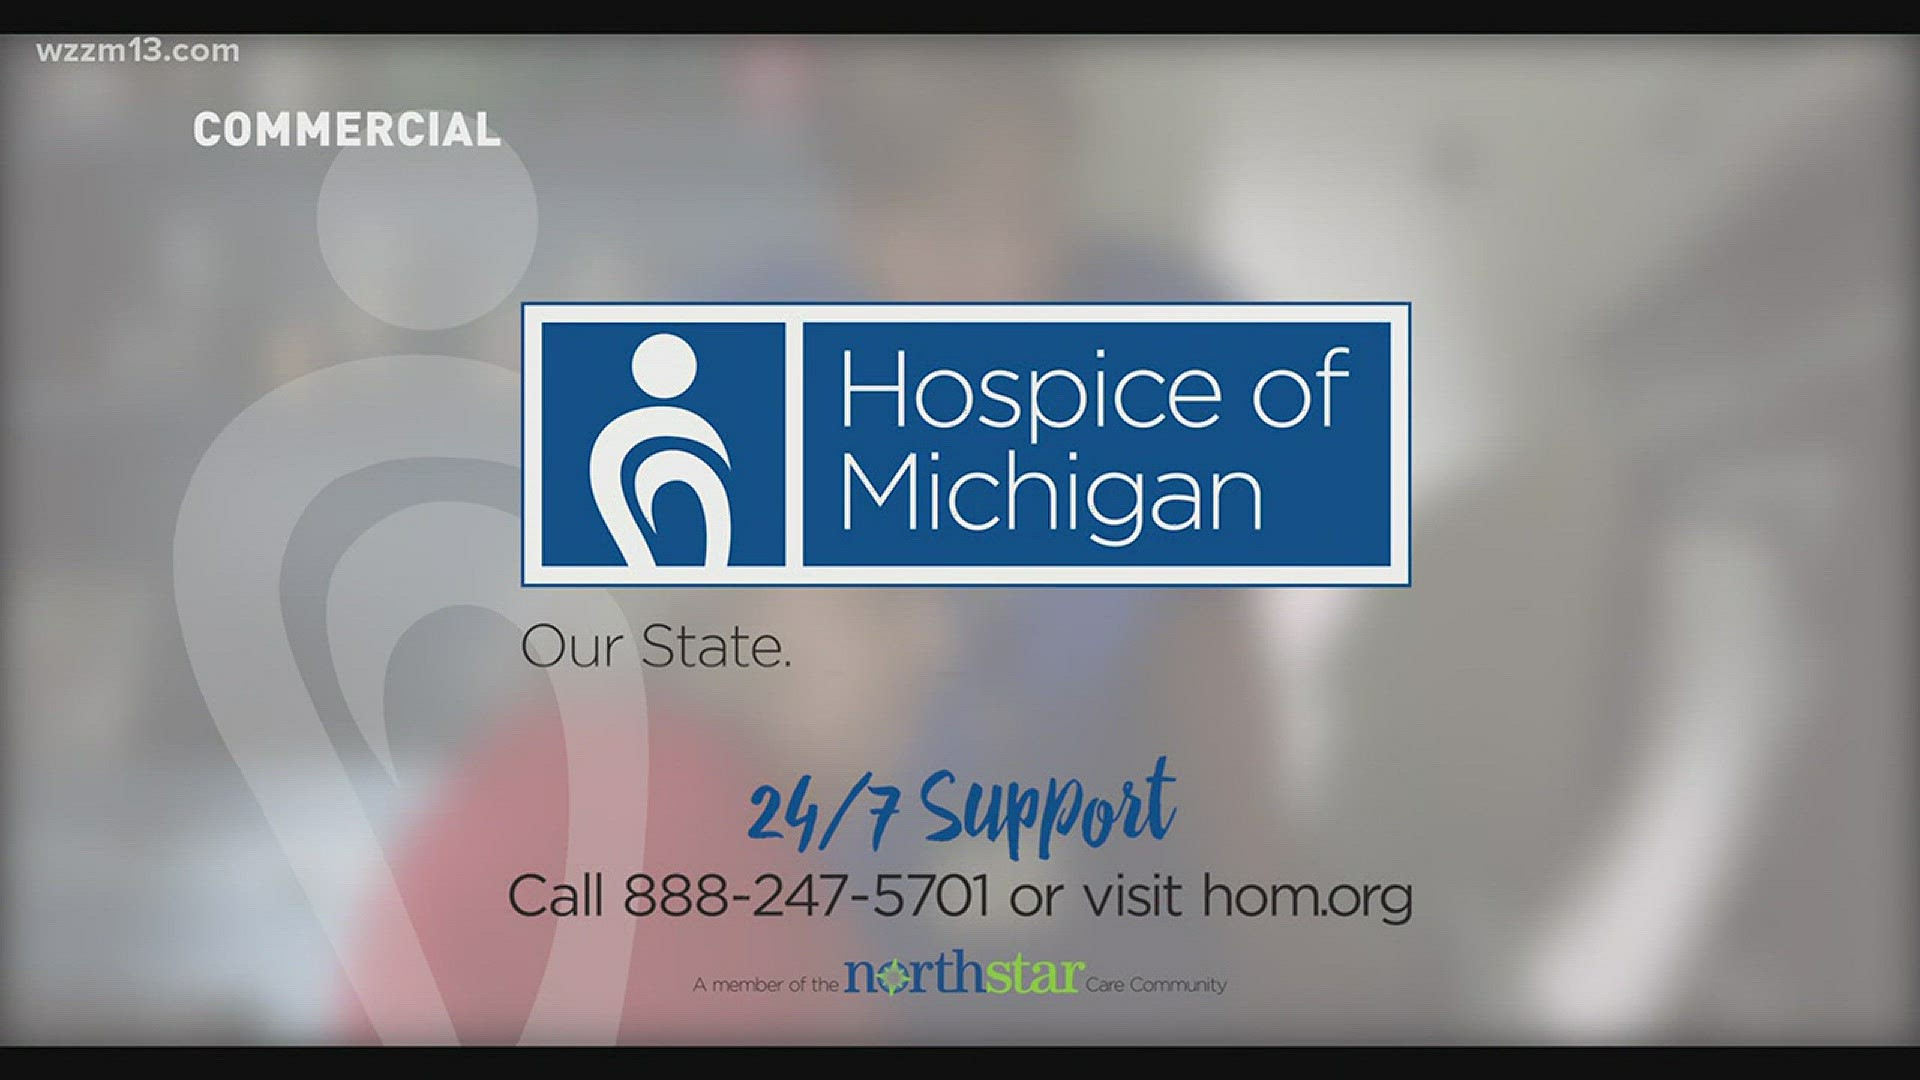 The Exchange: Hospice of Michigan